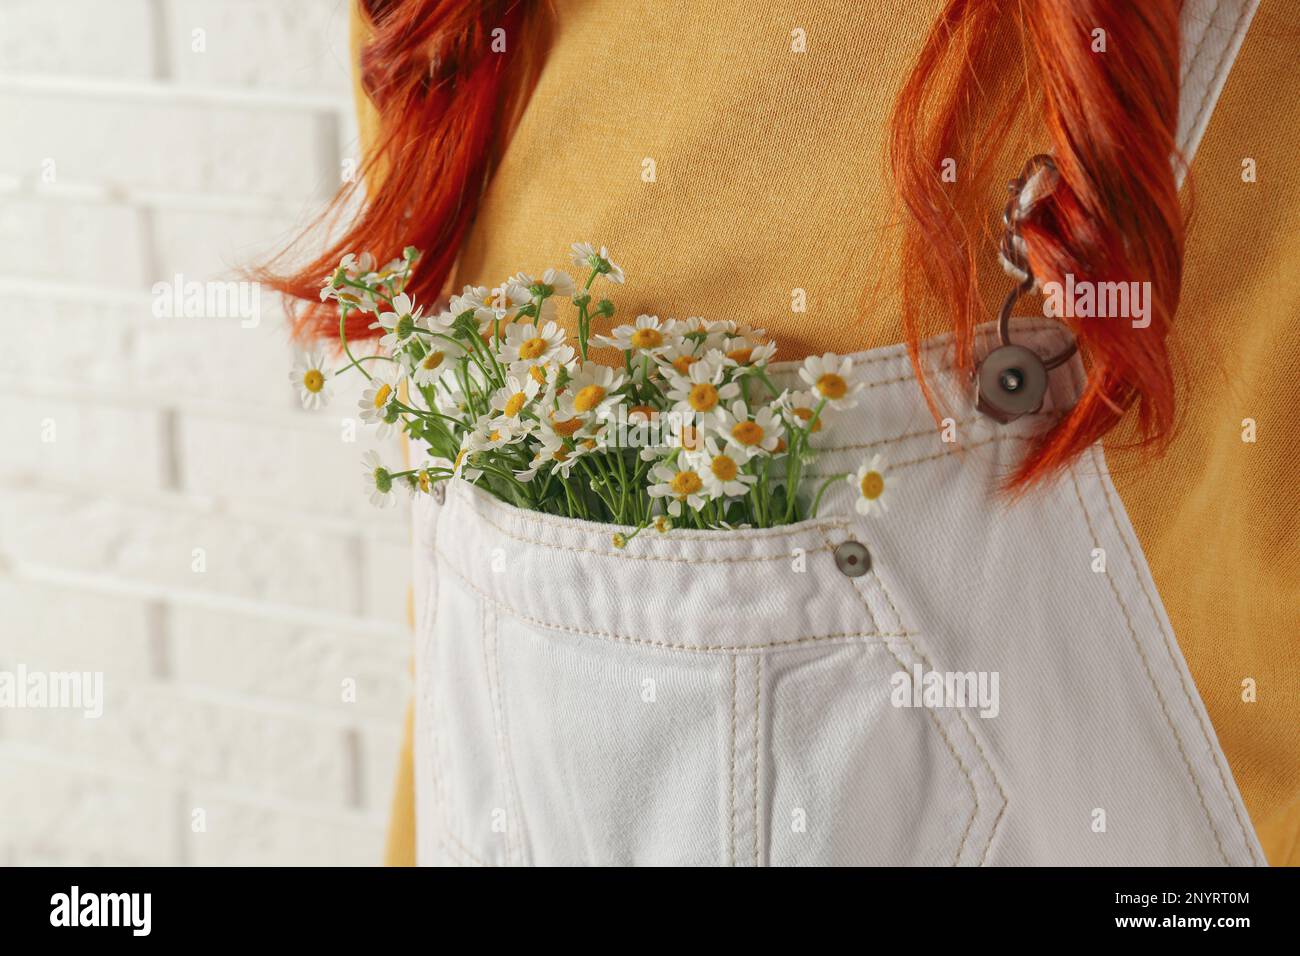 Woman with beautiful tender chamomile flowers in white jumpsuit's pocket, closeup Stock Photo